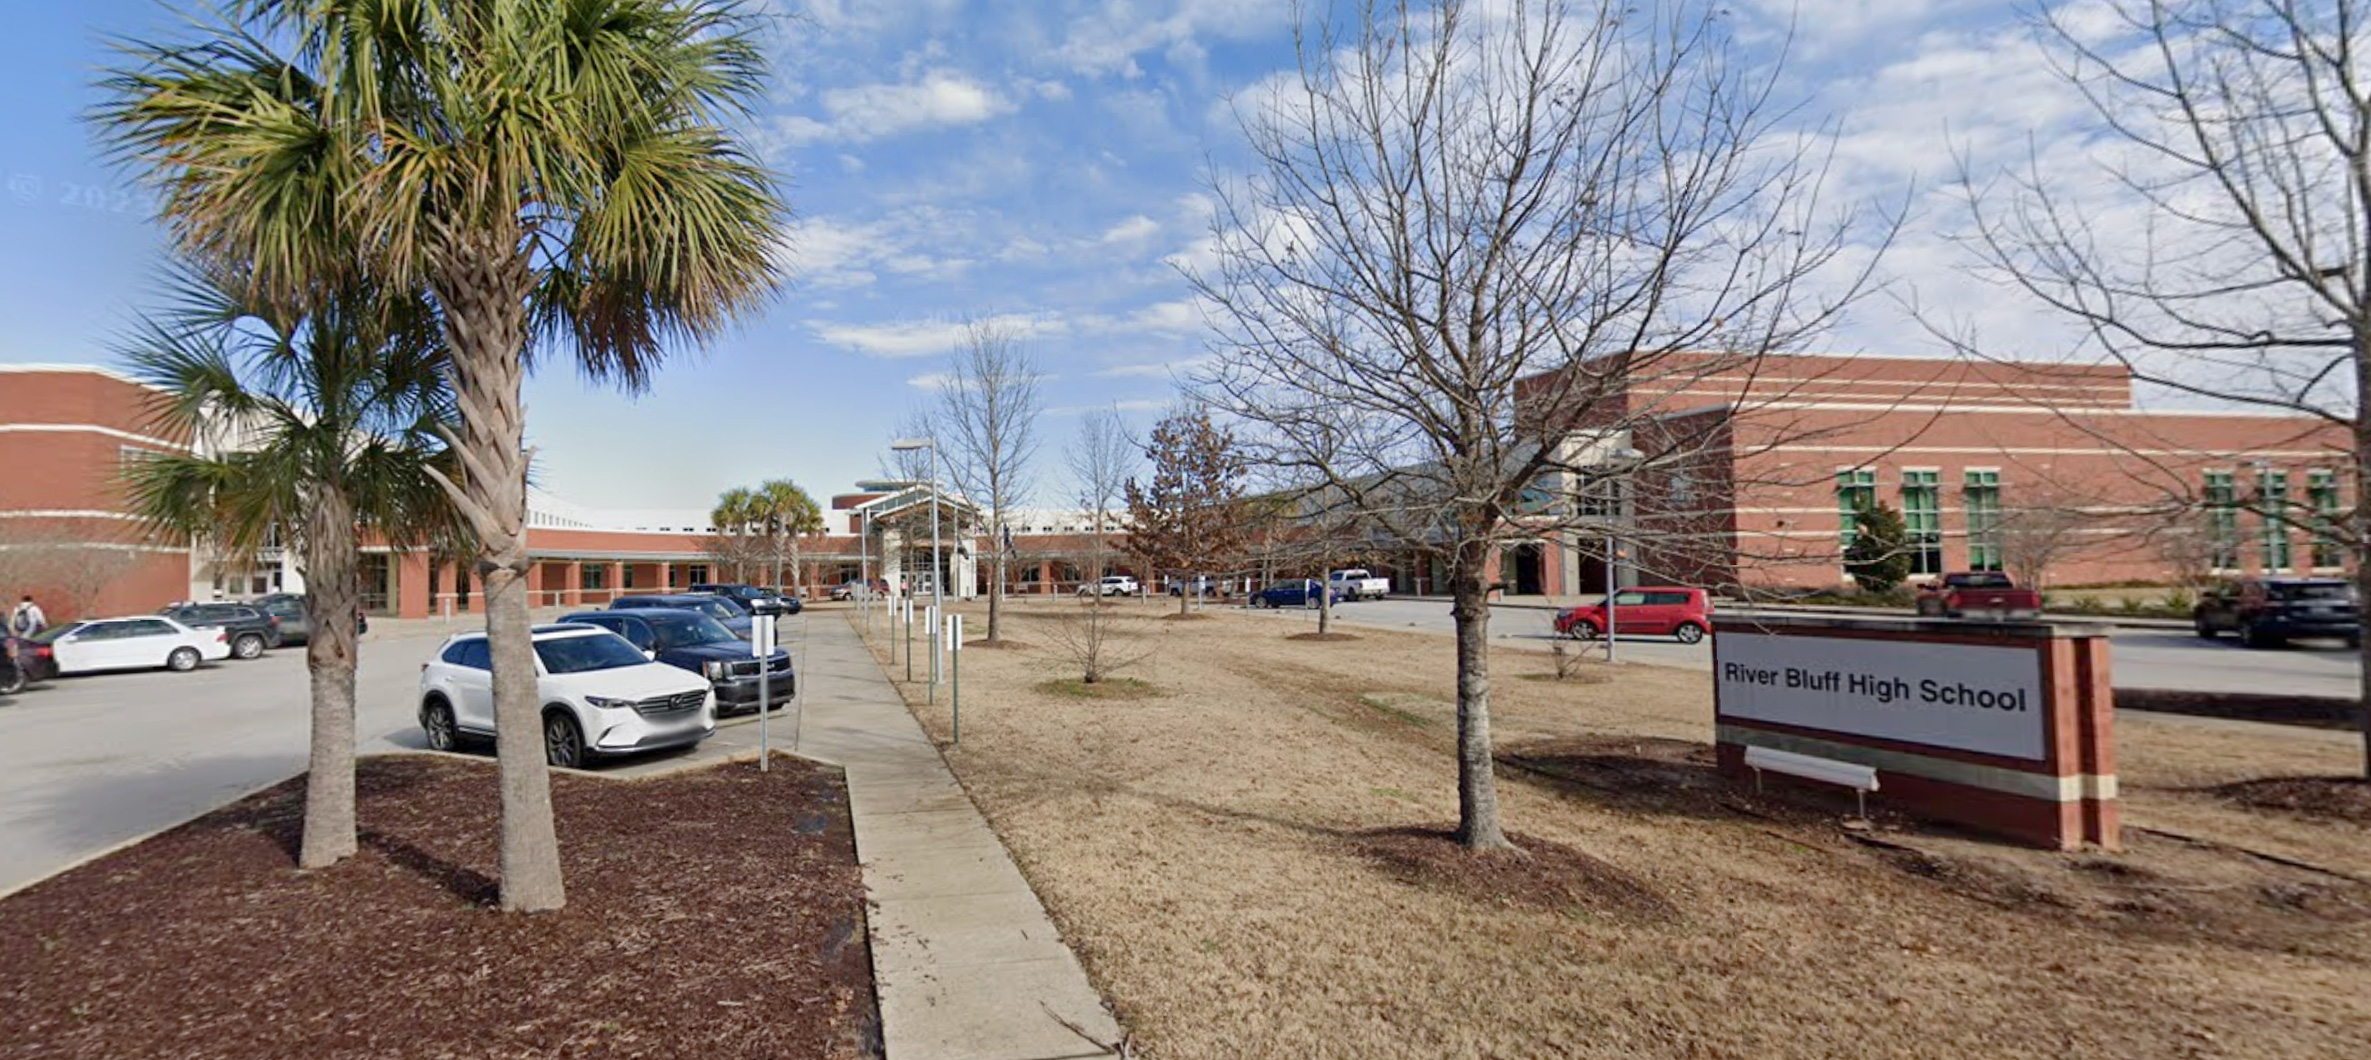 PHOTO: Entrance to River Bluff High School in South Carolina in Jan. 2023, seen from Google Street View.